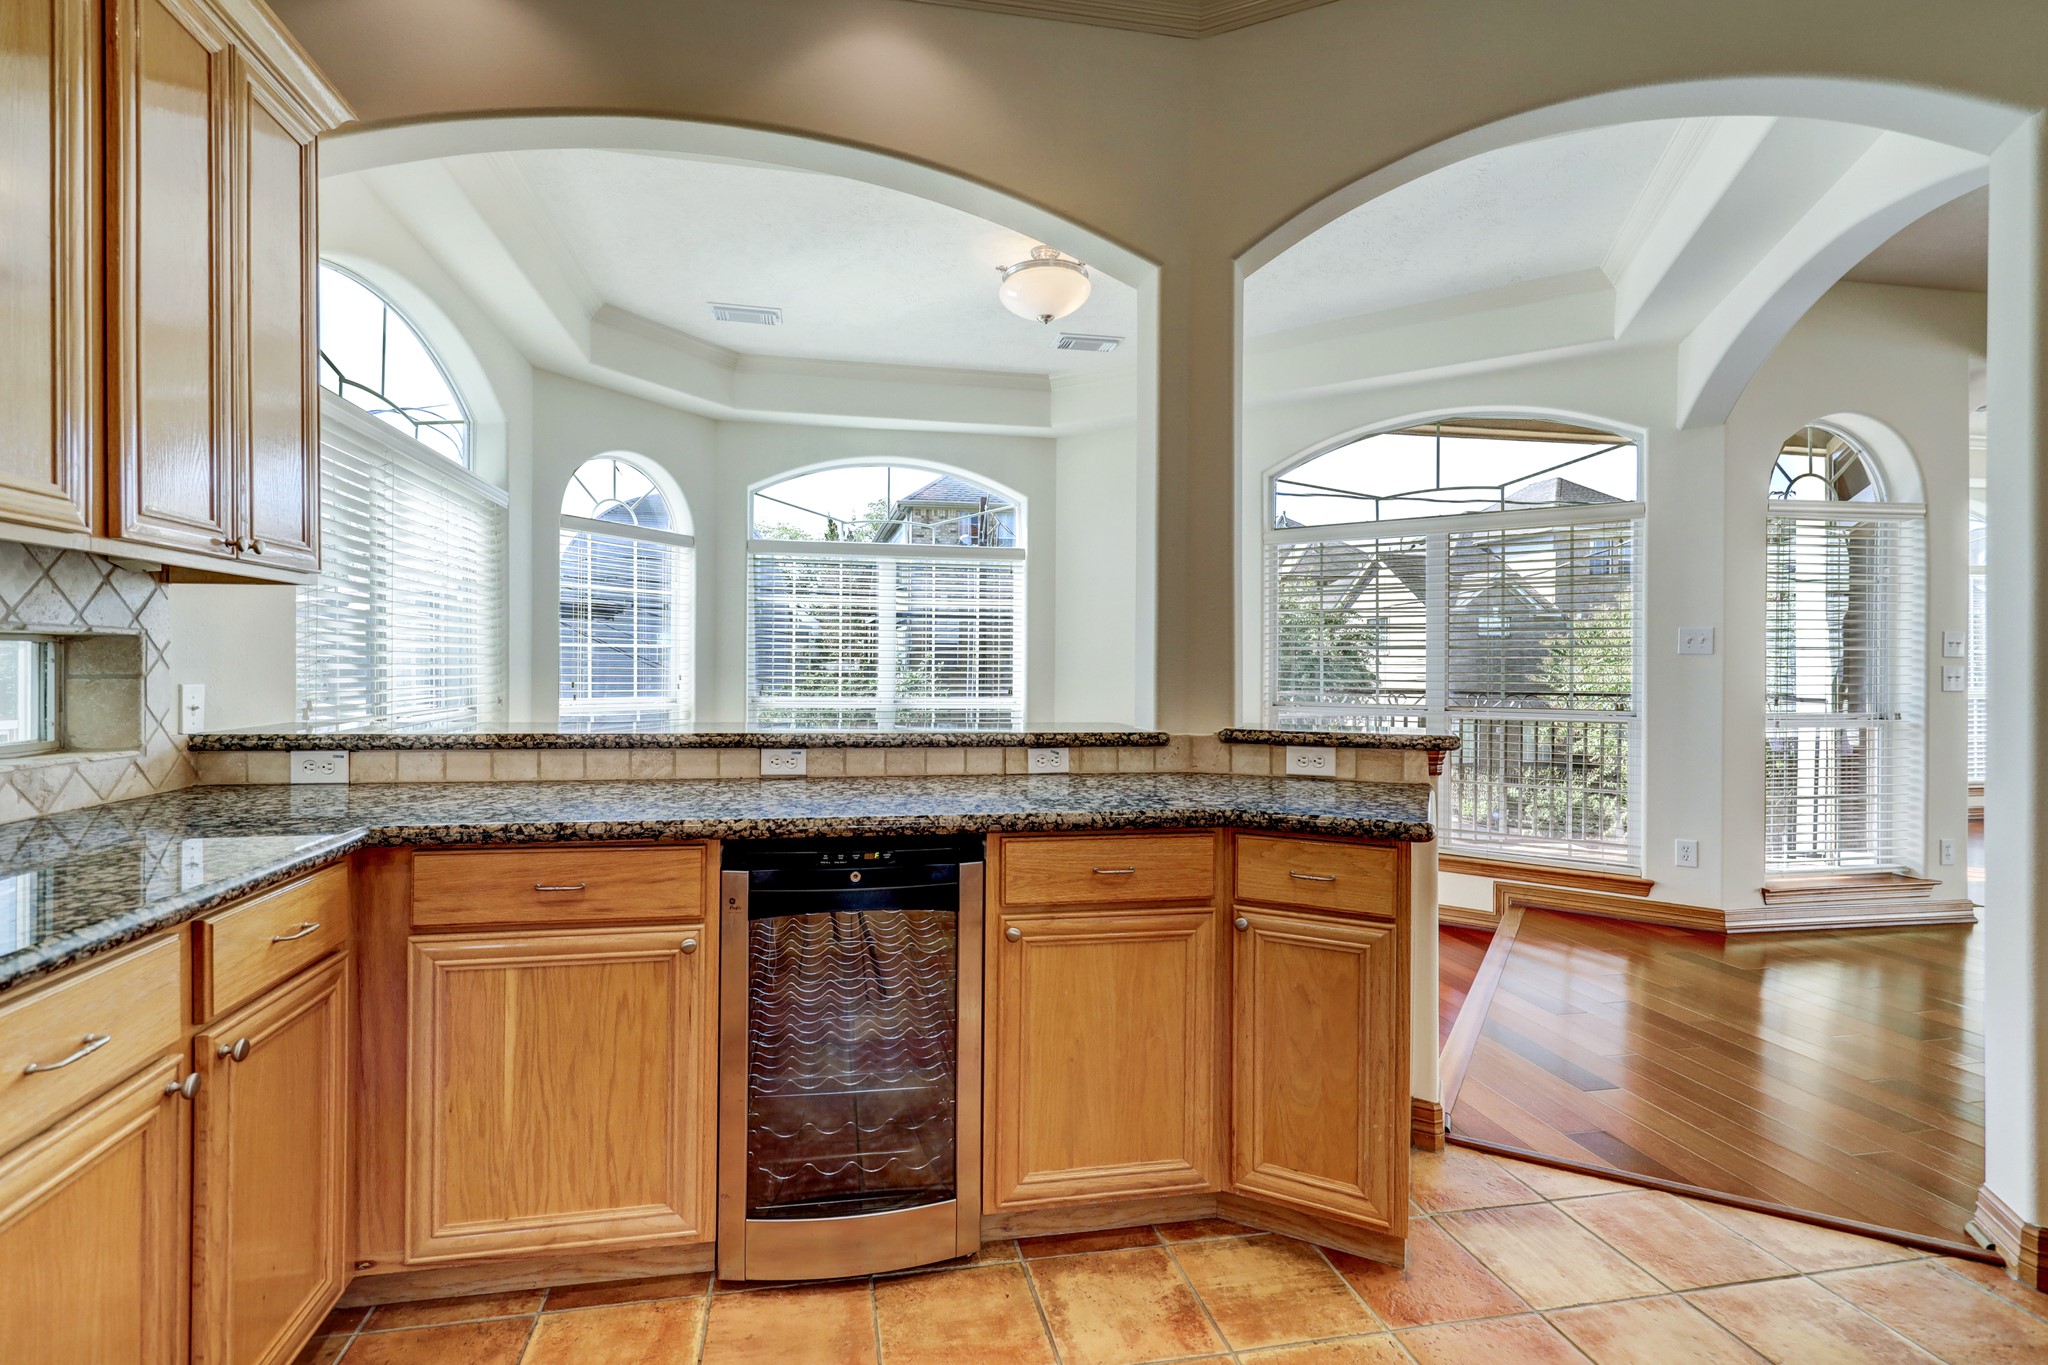 Granite countertops throughout the house